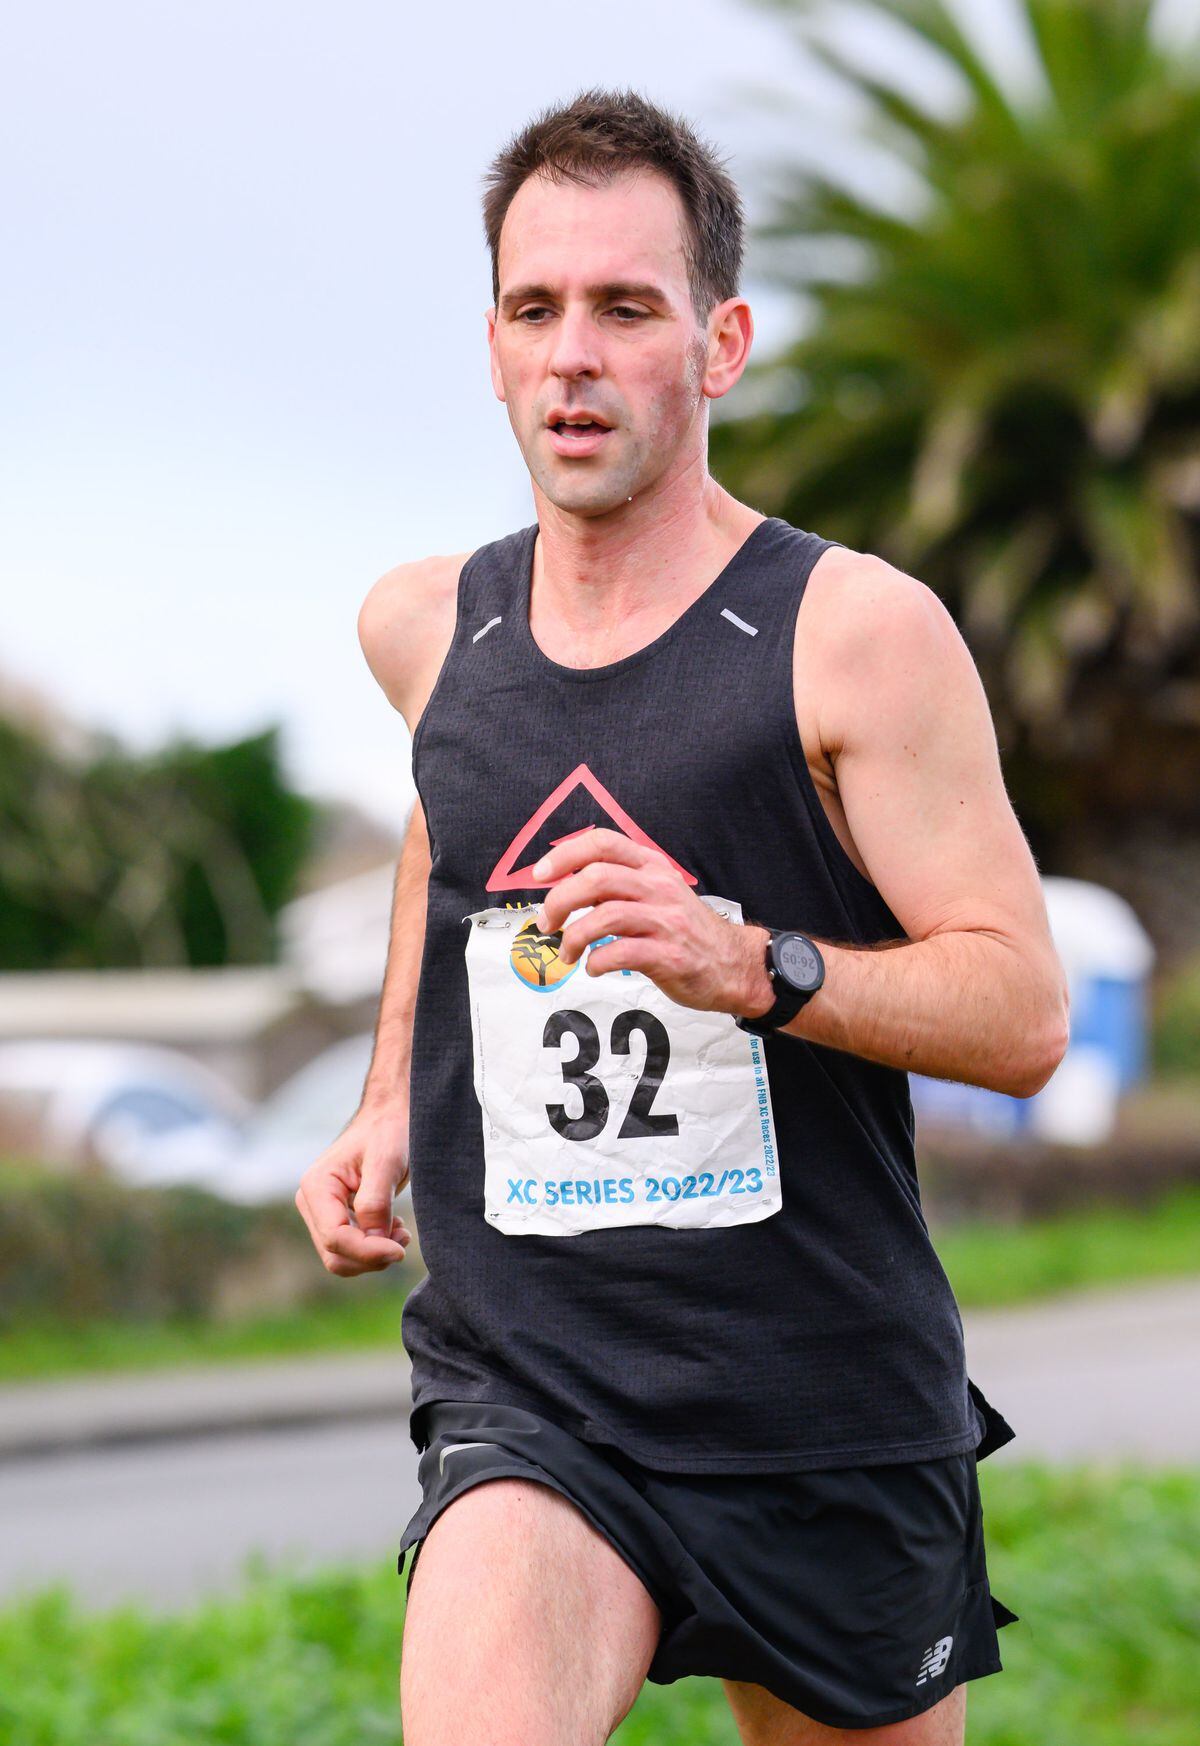 Steve Dawes is one of four previous county champions in the Guernsey contingent heading to the Hampshire Championships. (Picture by Andrew Le Poidevin, 31608915)